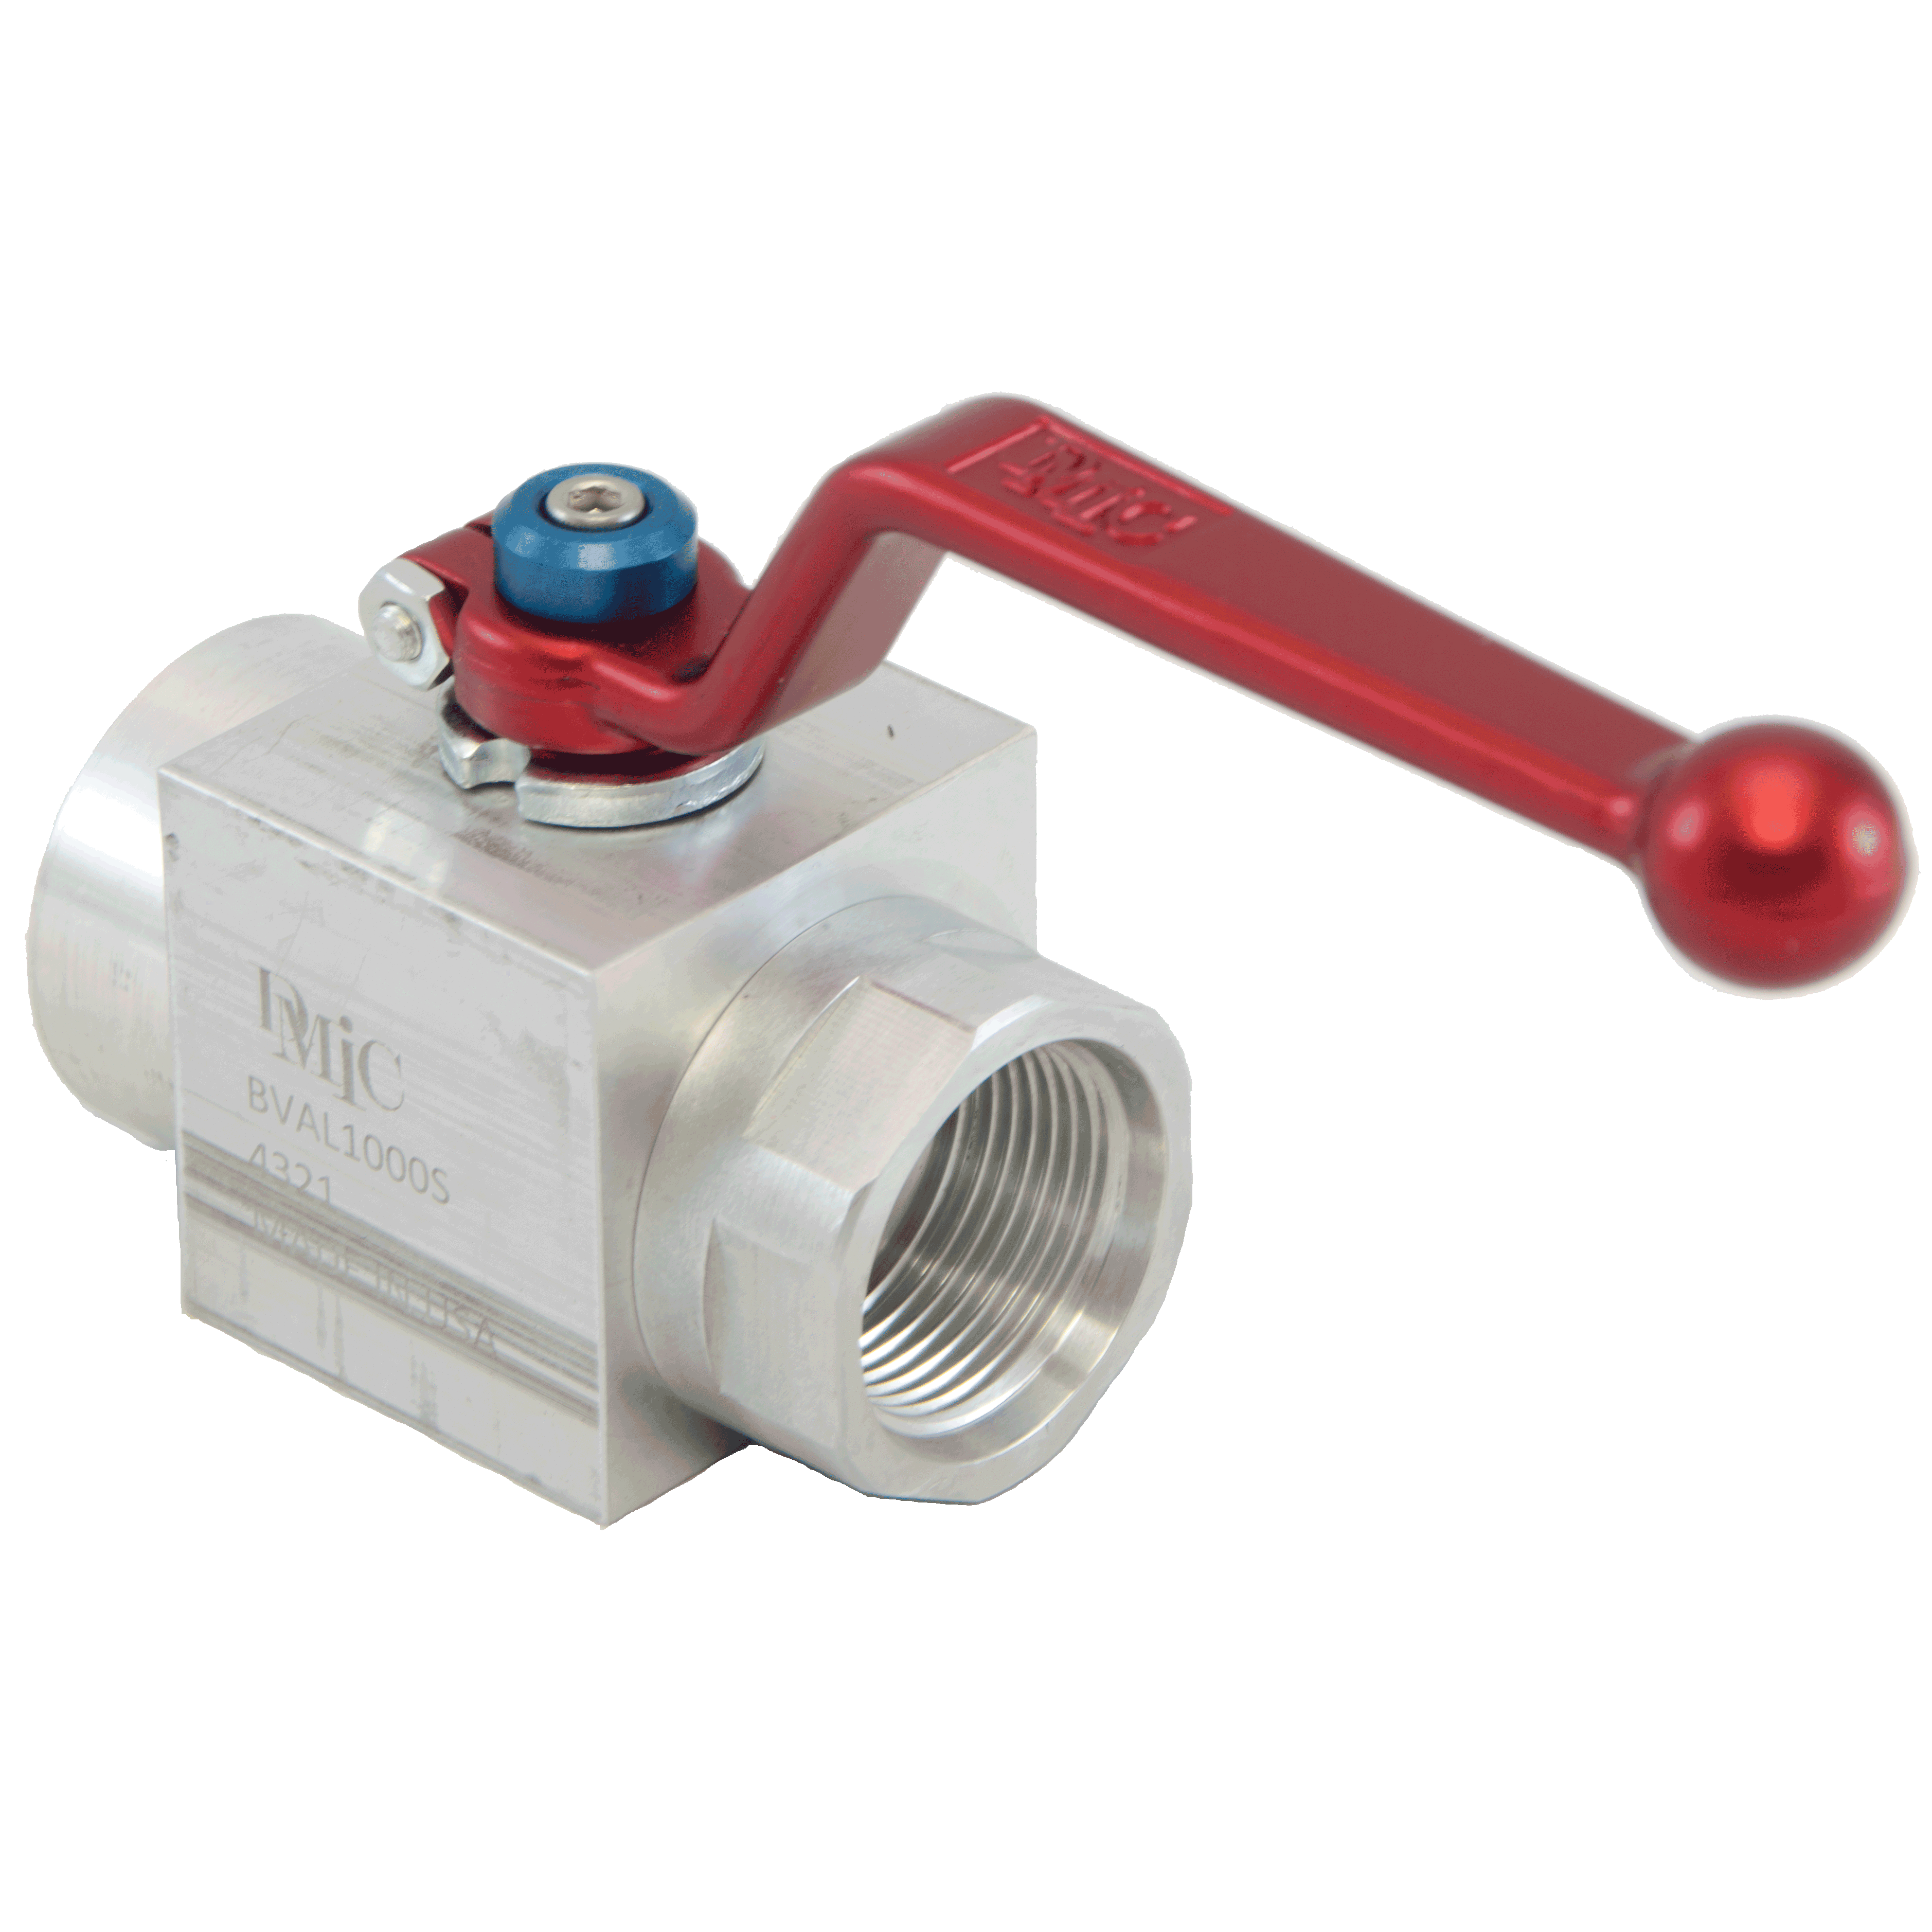 BVAL-1000N-4321-AZZN : DMIC Suction Ball Valve, 1 NPT, Aluminum, 600psi, Two-Way, with Locking Handle